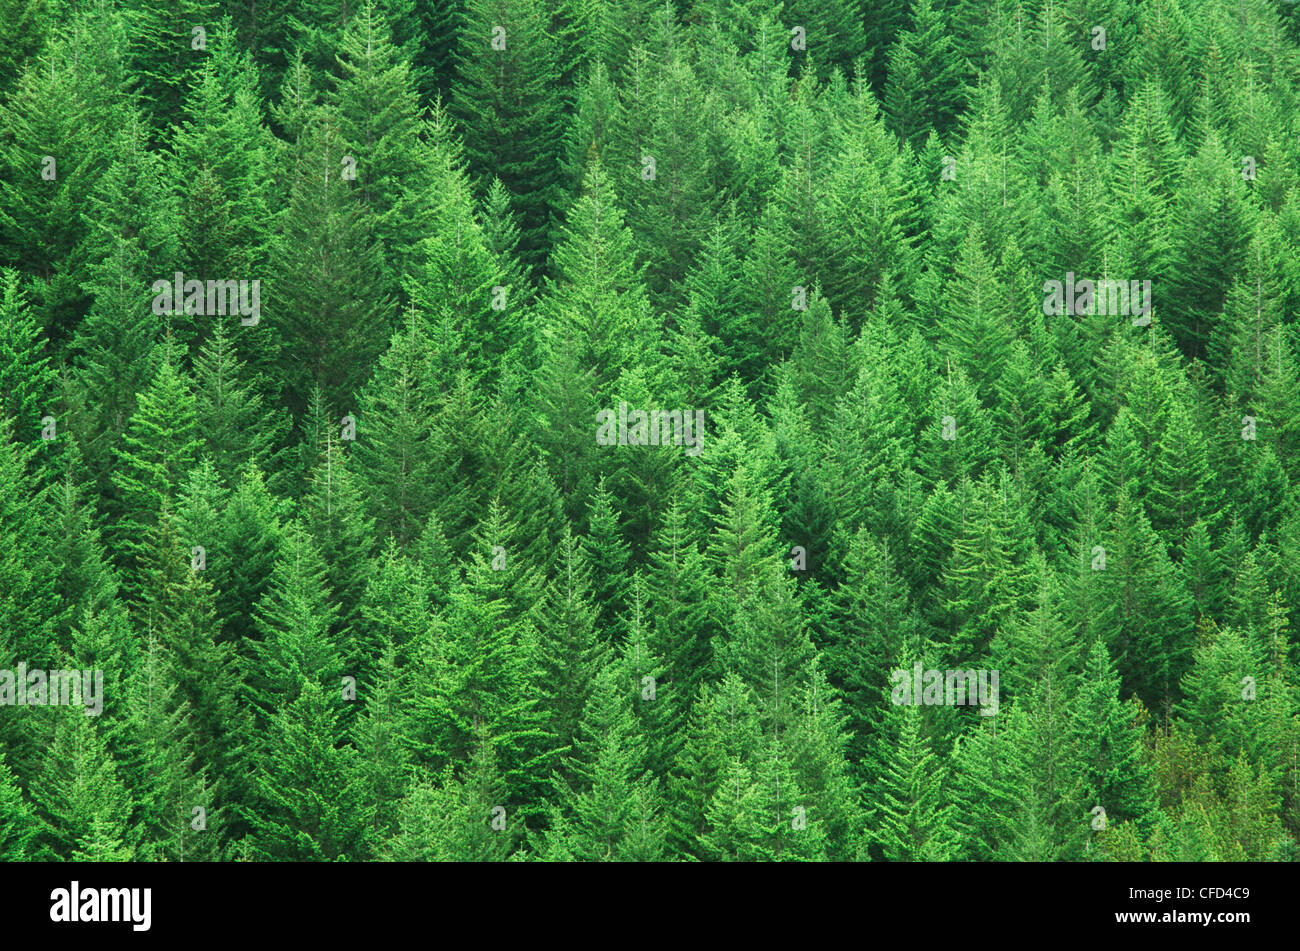 Reforested fir and hemlock trees on hillside, British Columbia, Canada. Stock Photo